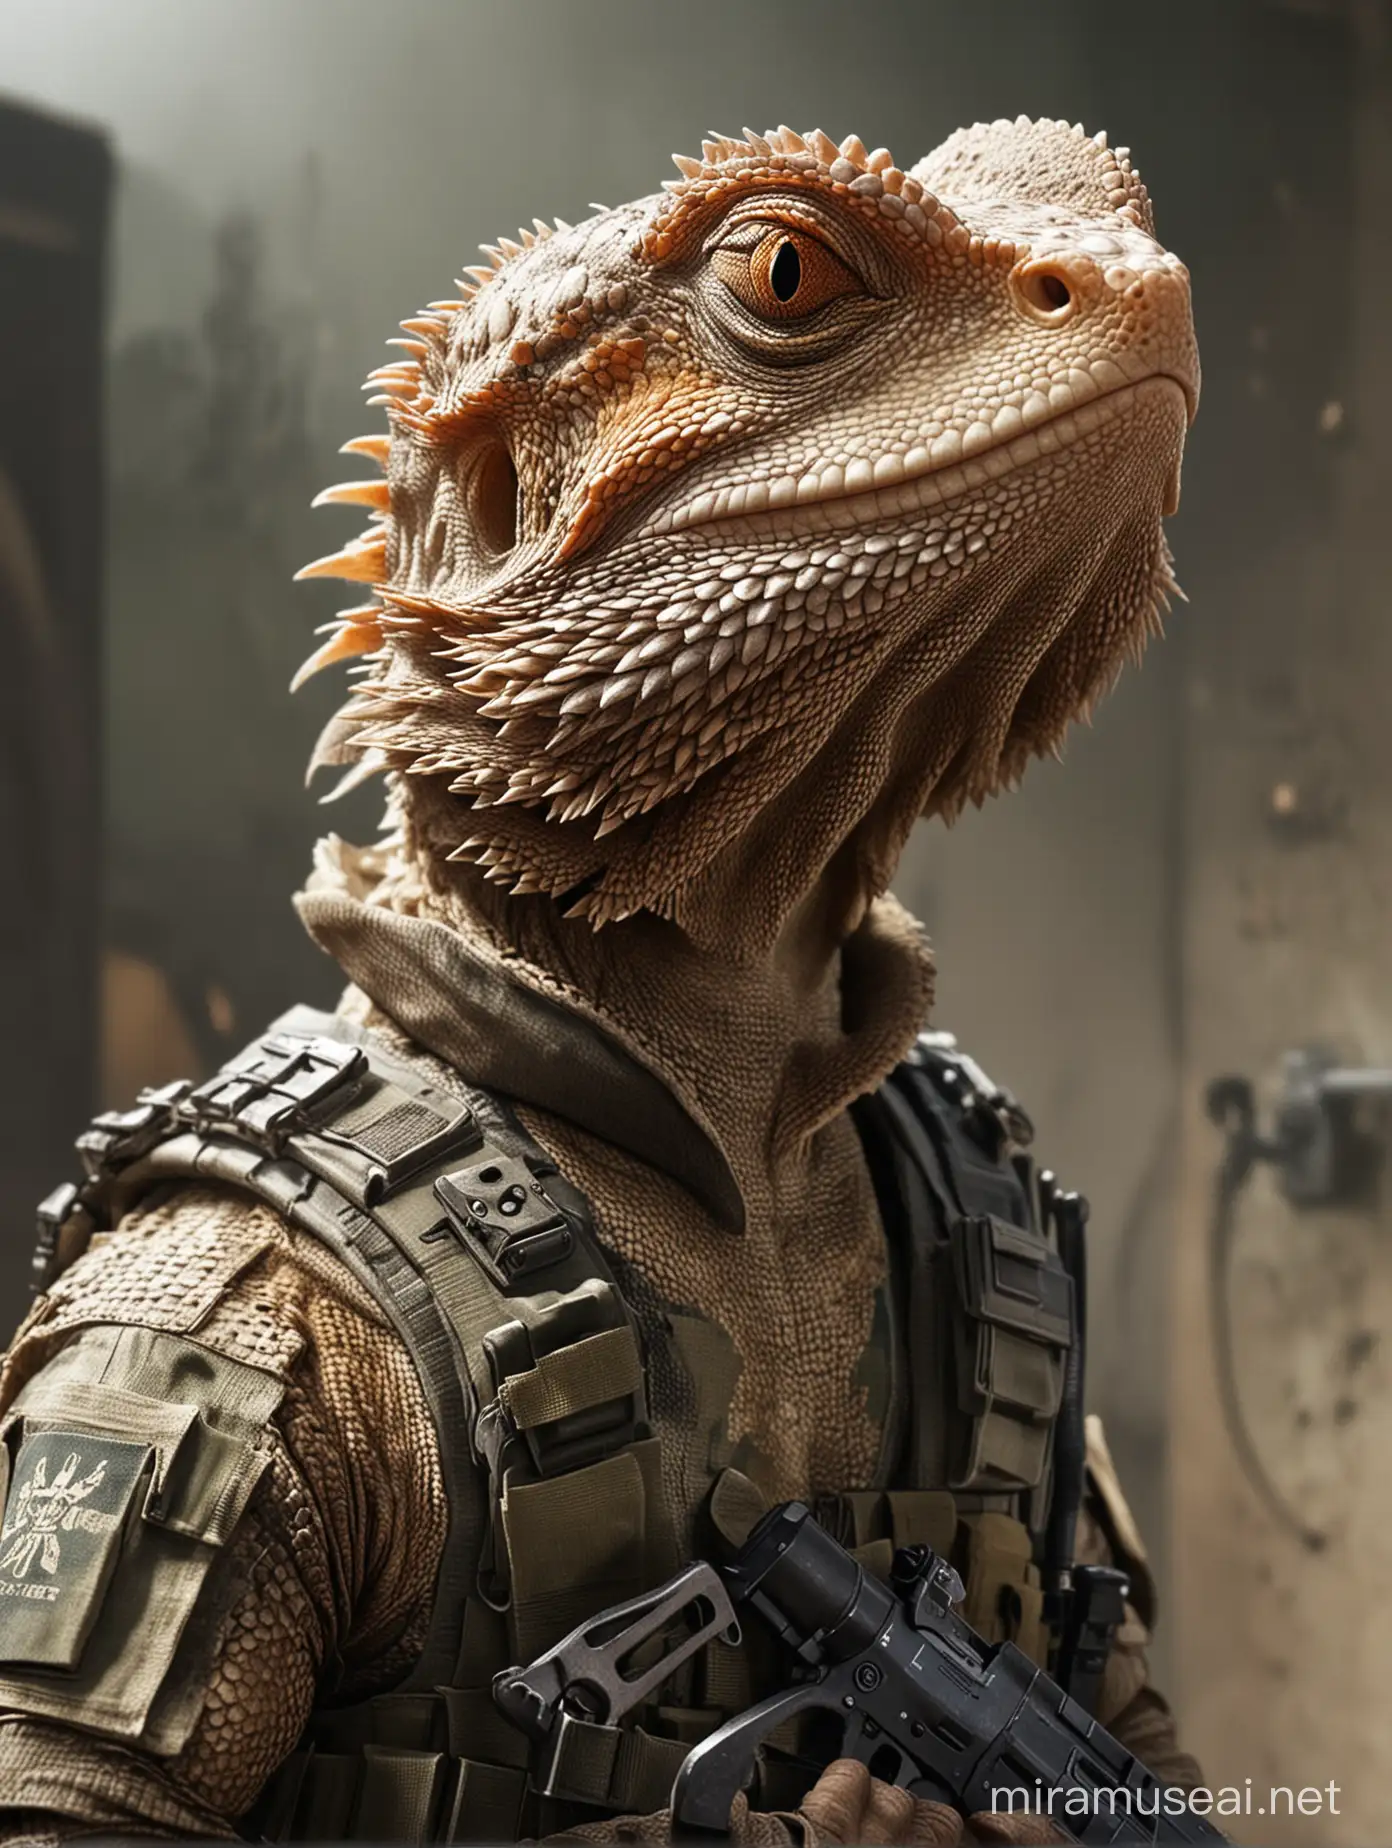 Bearded Dragon Playing Call of Duty Reptile Gamer Adventure